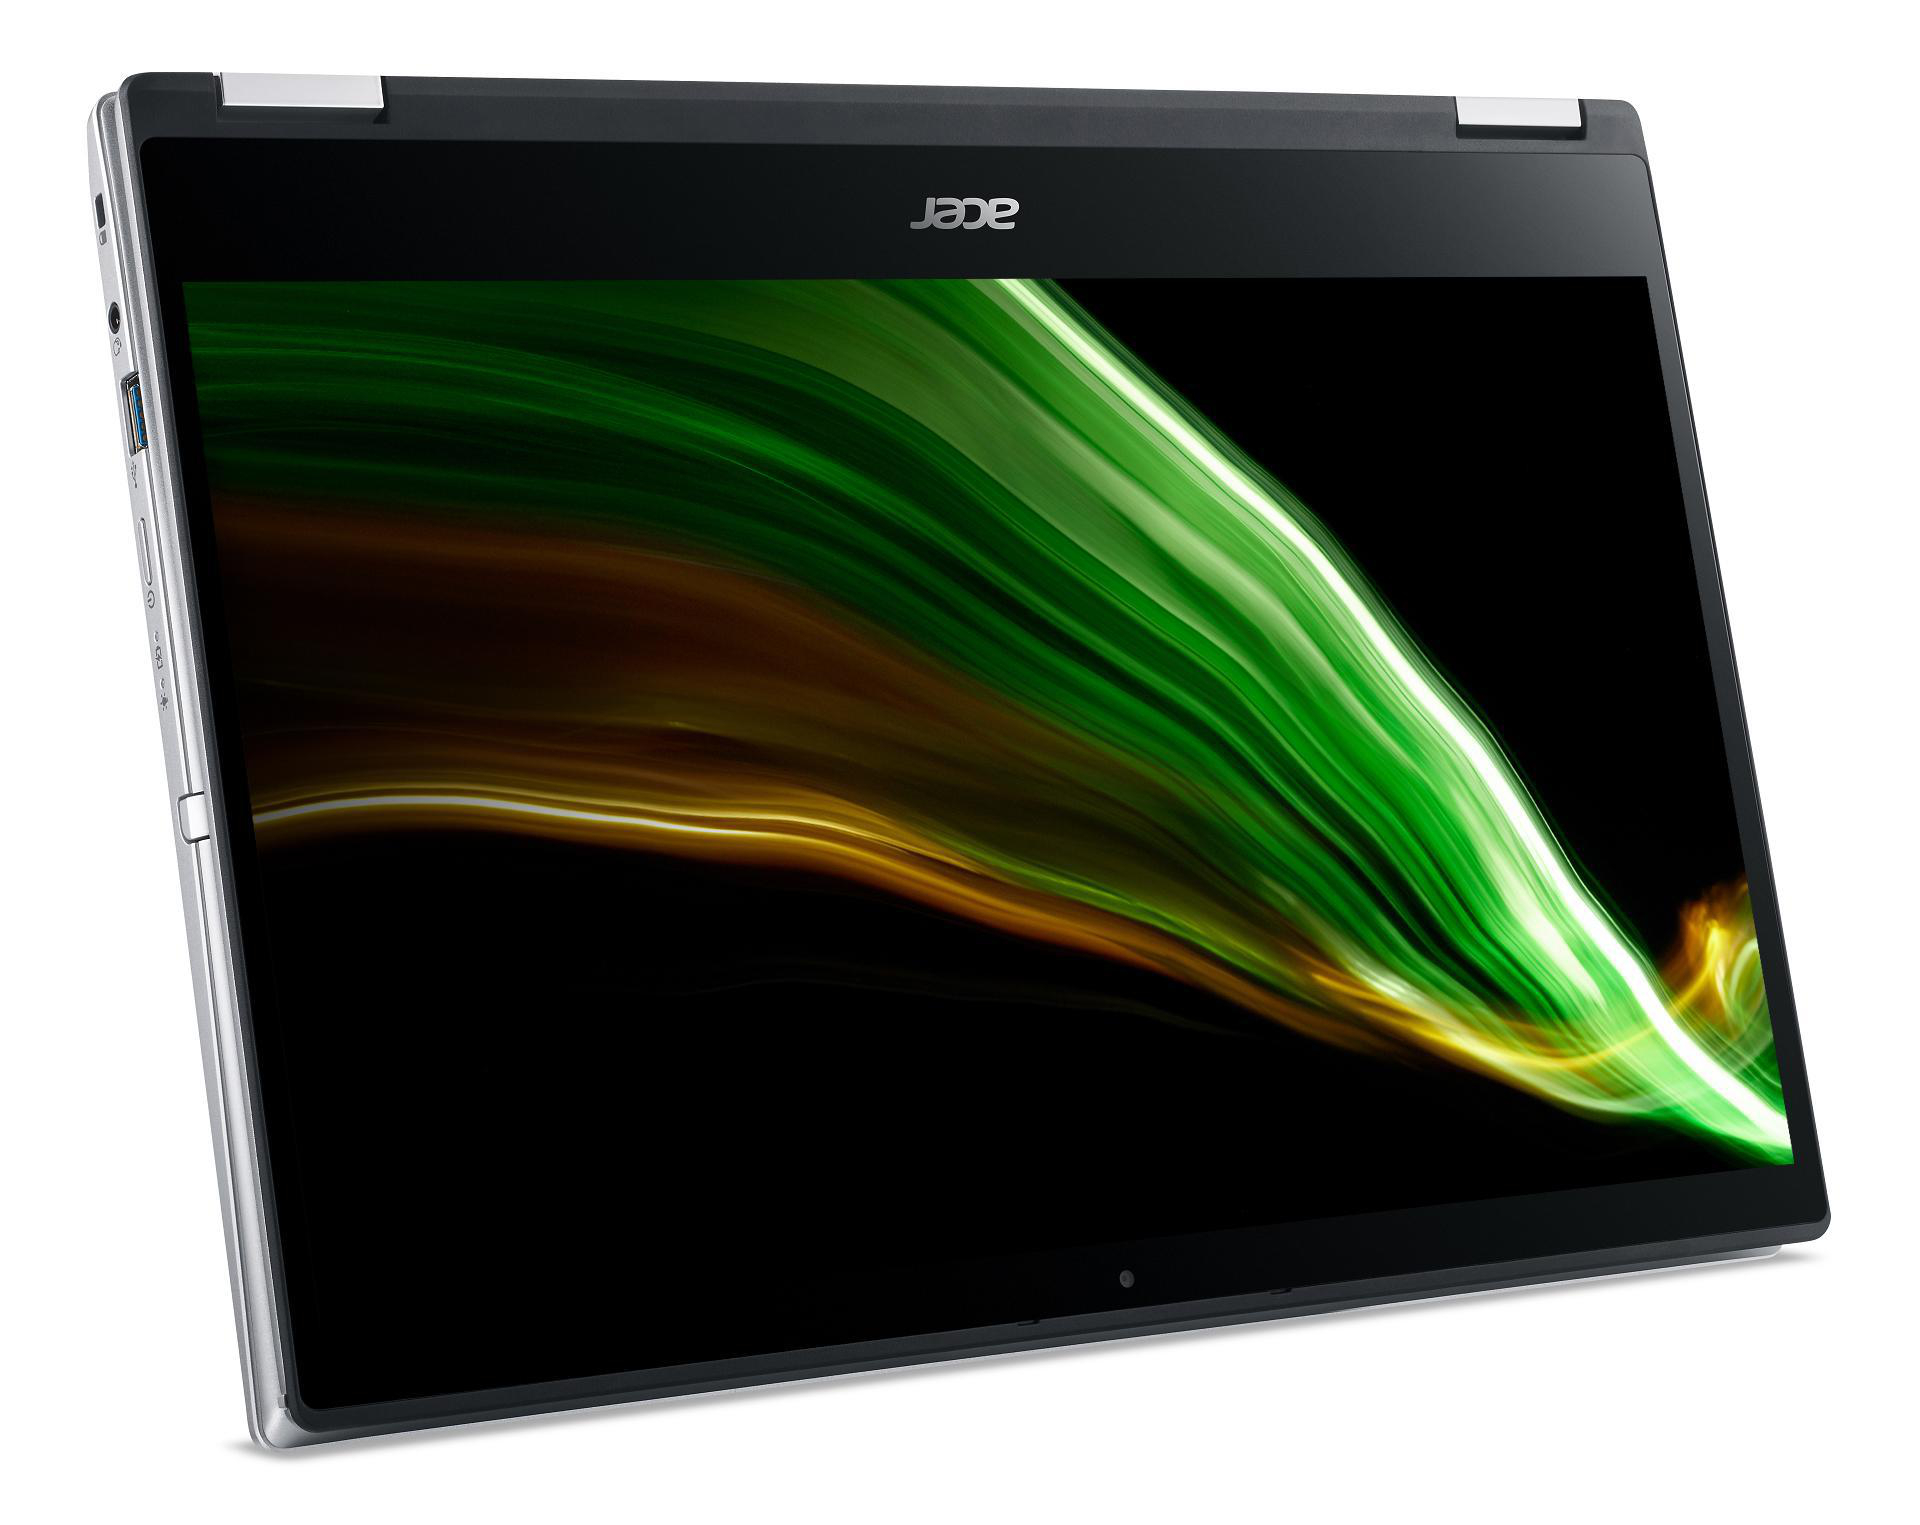 ACER Acer Spin 3 SSD, GB Silber Radeon™ Bit) Silver AMD Onboard S-Modus GB 4 Notebook, Zoll AMD, (64 14 Athlon™ Windows RAM, Touchscreen, Home Display Prozessor, 128 Graphics, 10 (SP314-21N-R686), mit